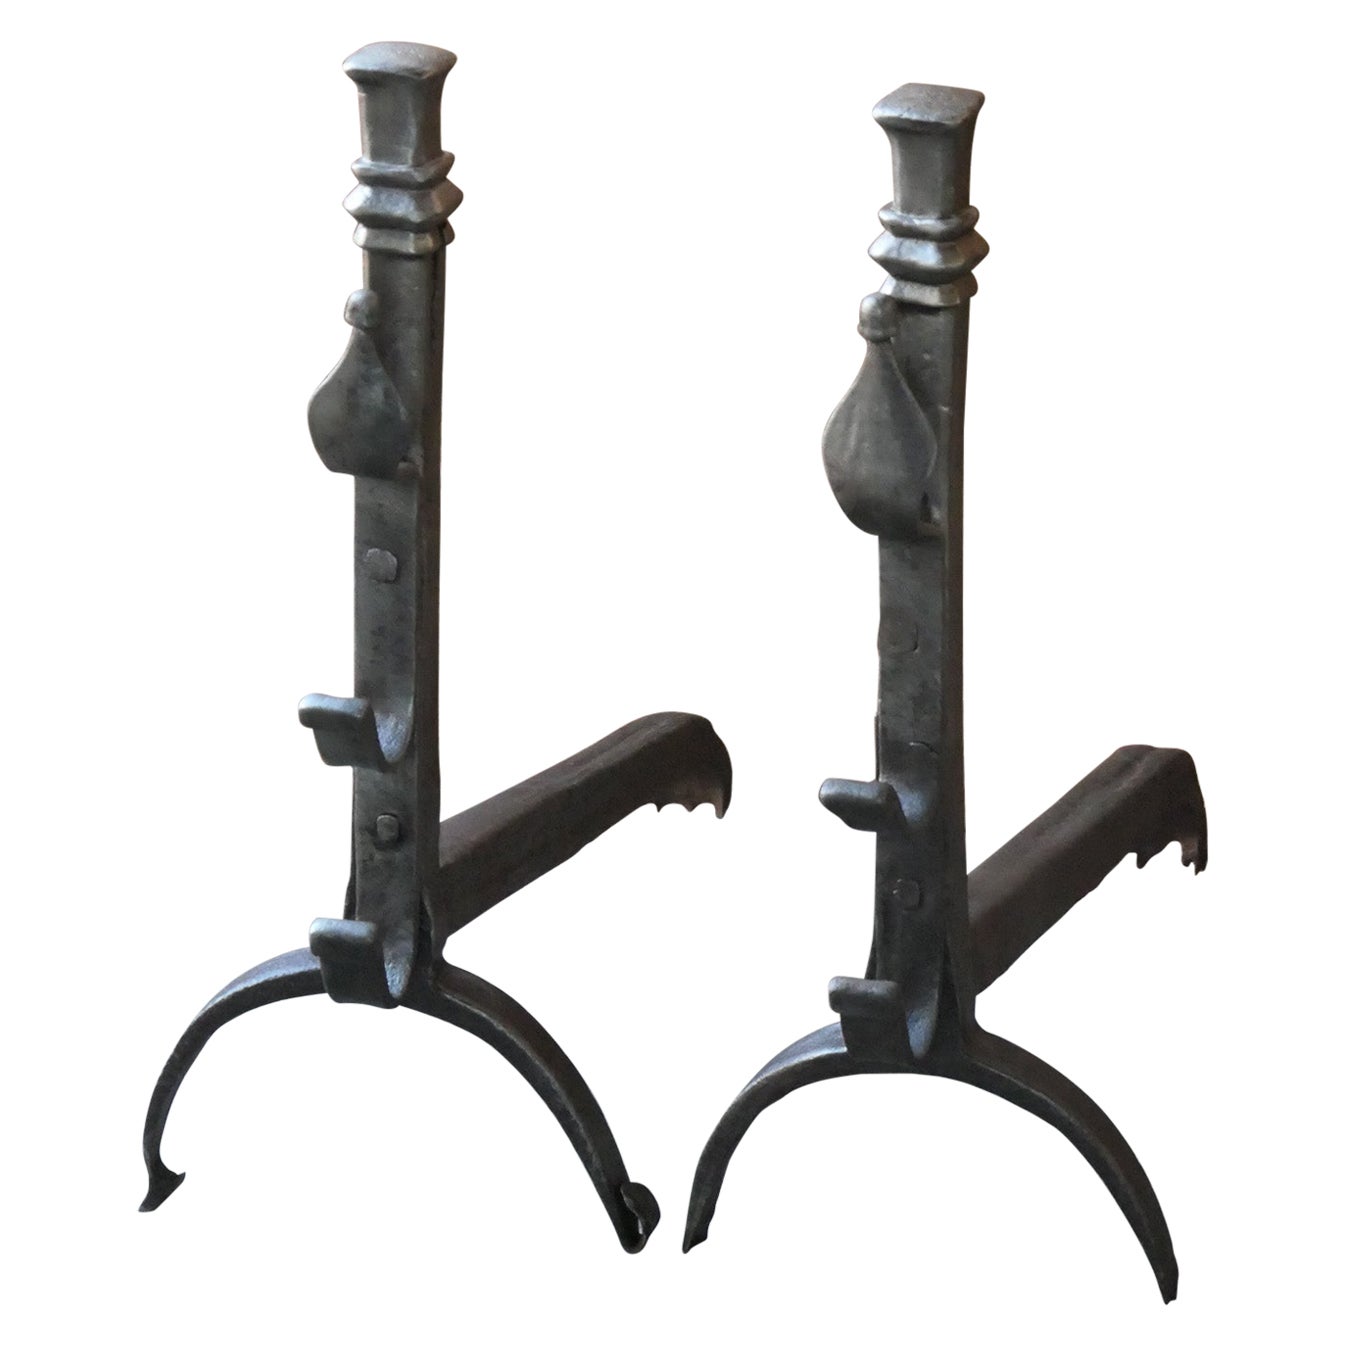 18th-19th Century French Neoclassical Period Andirons or Firedogs